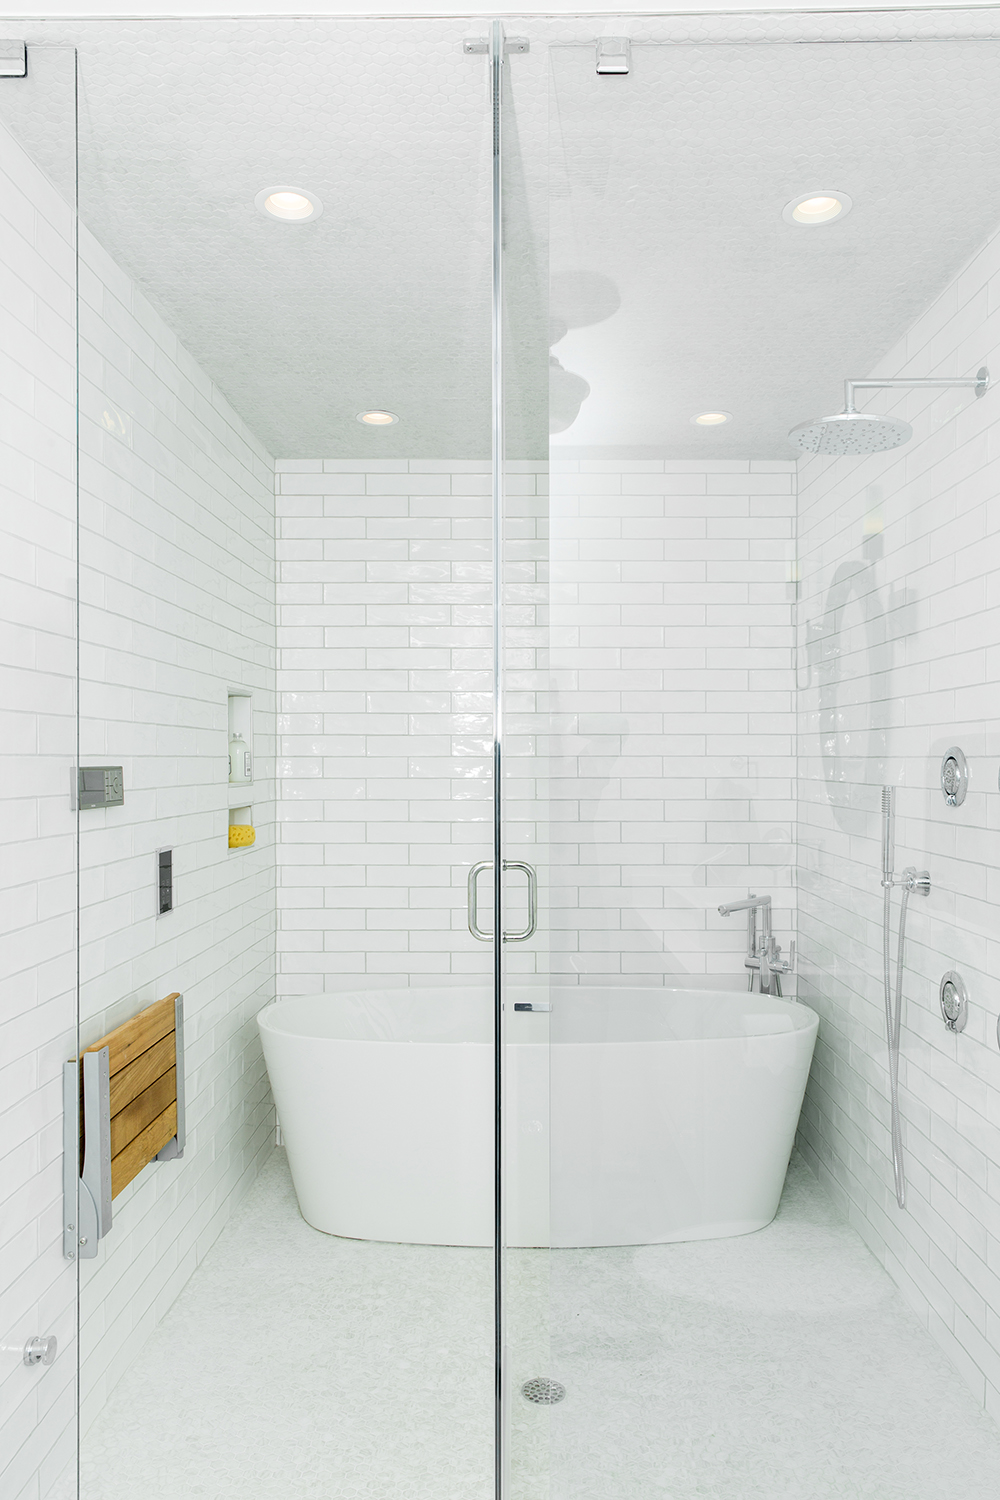 A glass-enclosed bathtub and shower.